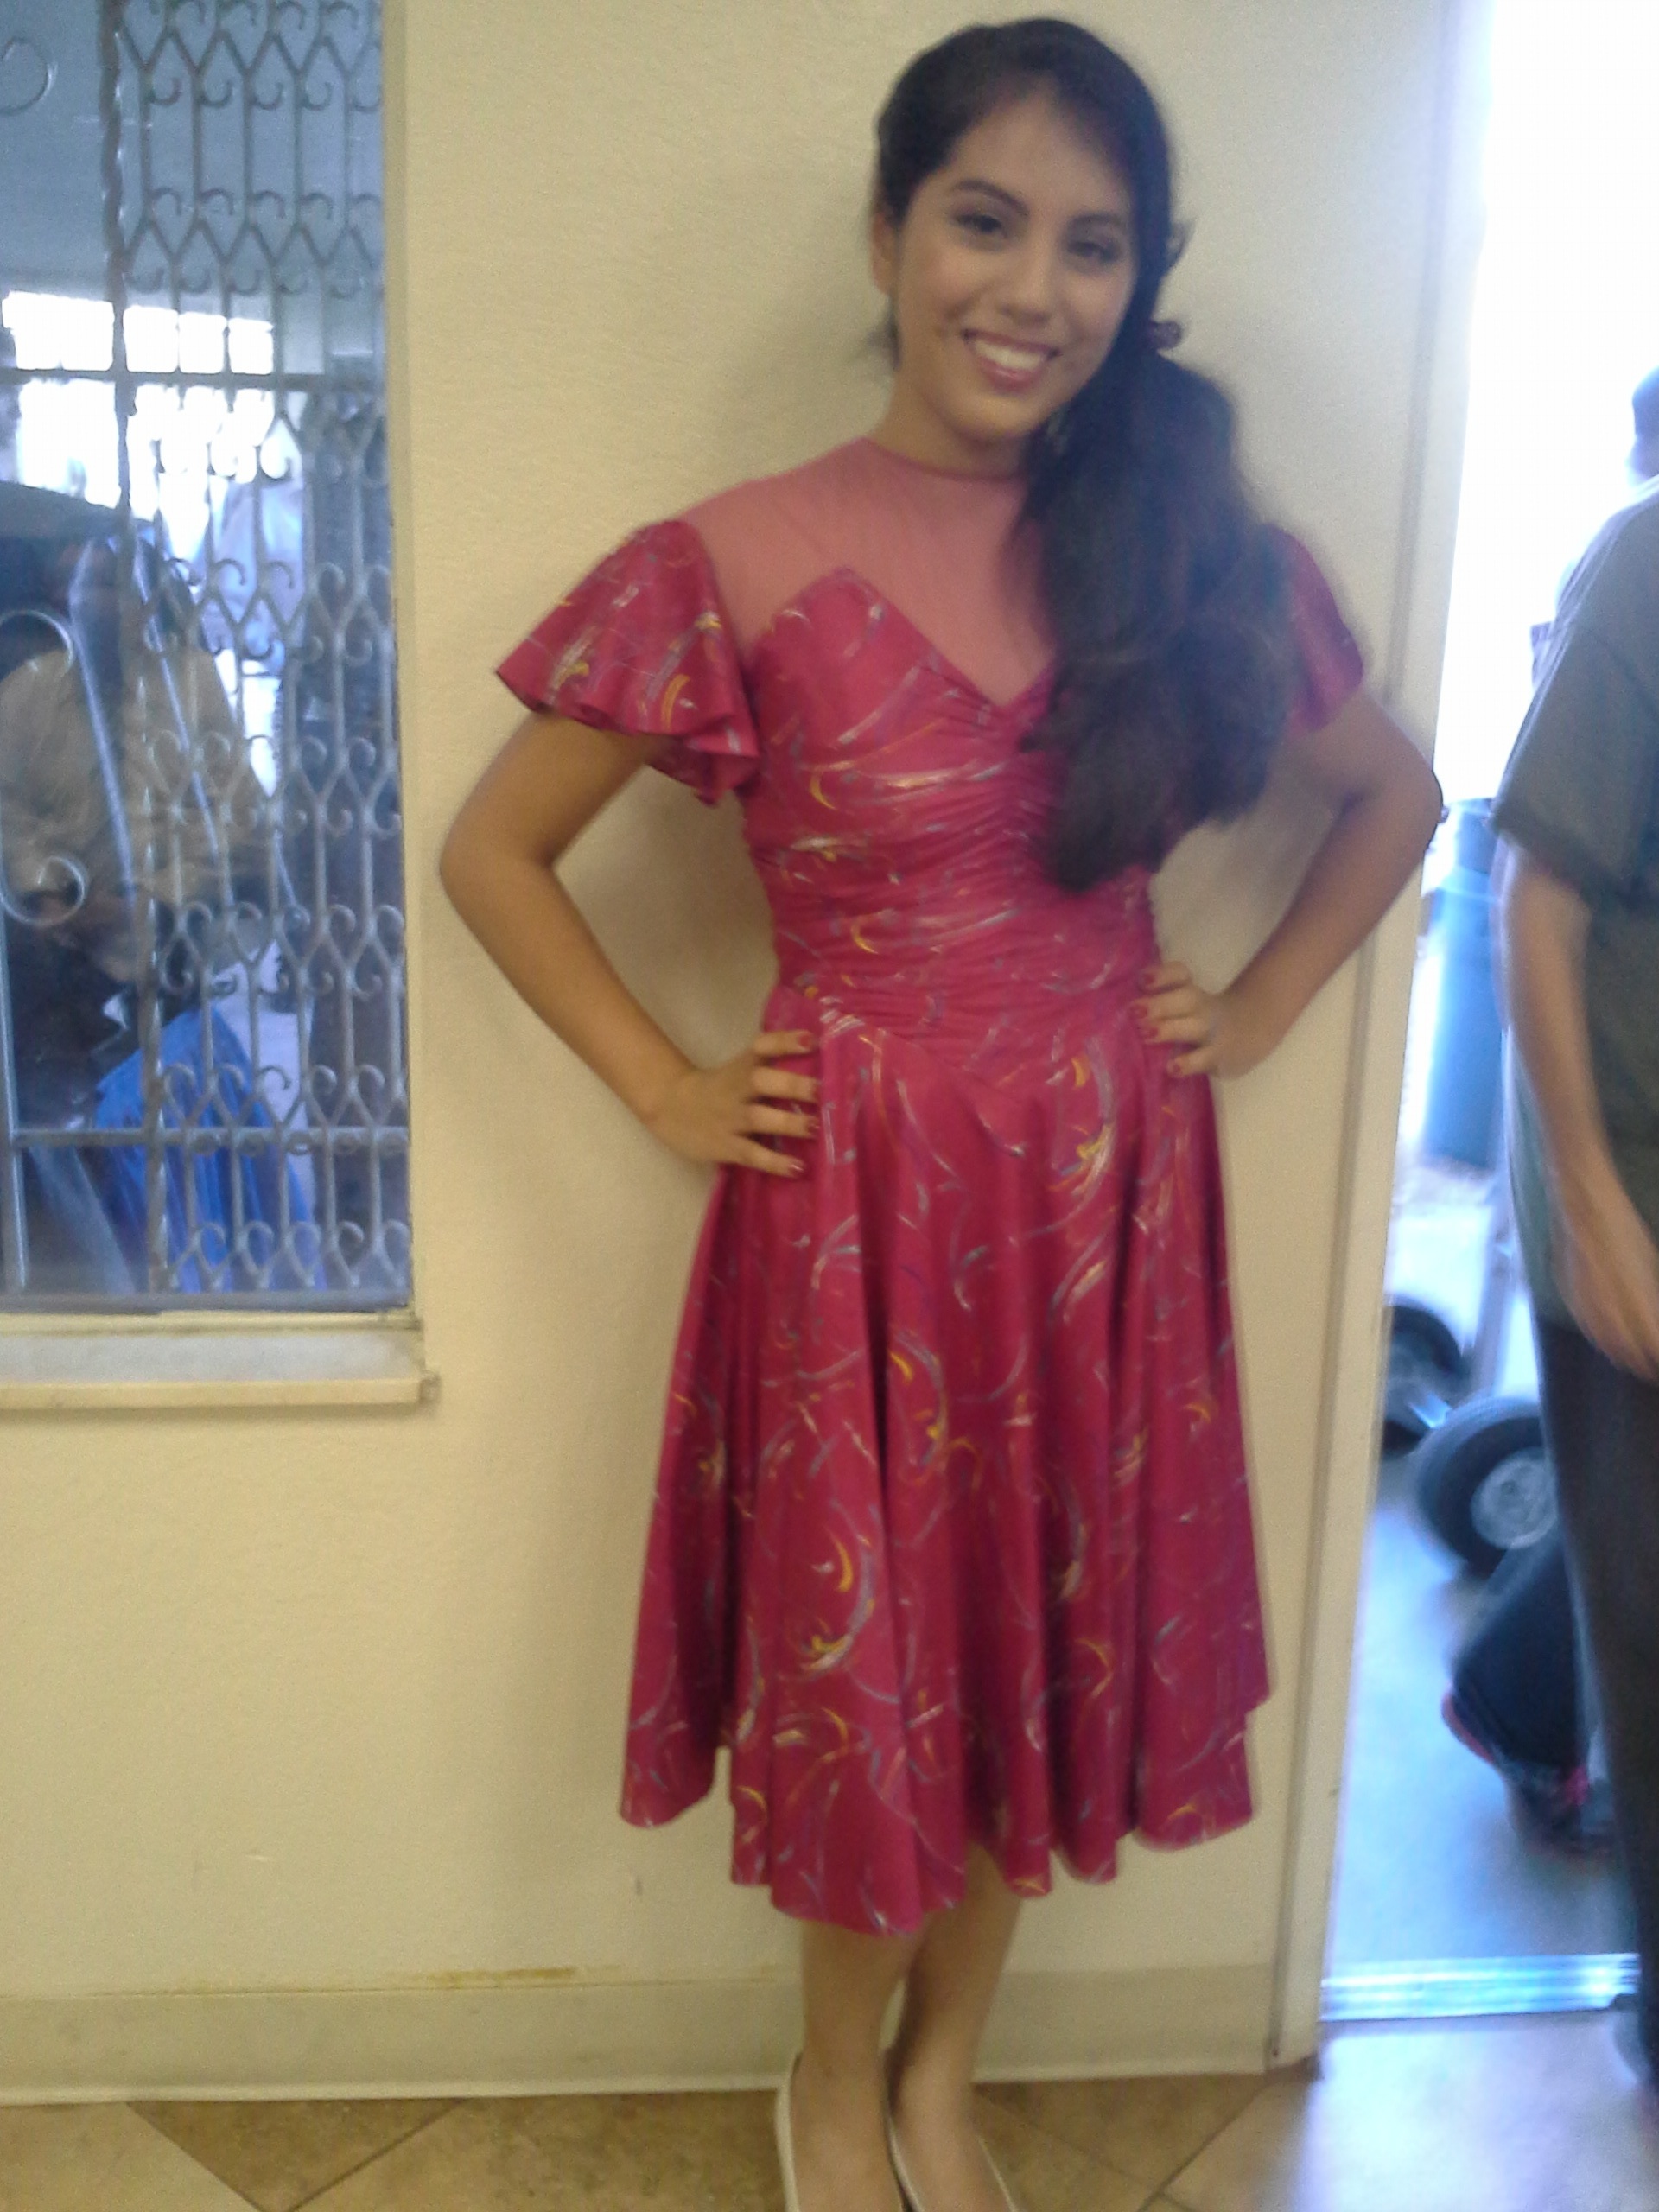 On set of McFarland as Sonia's Friend.